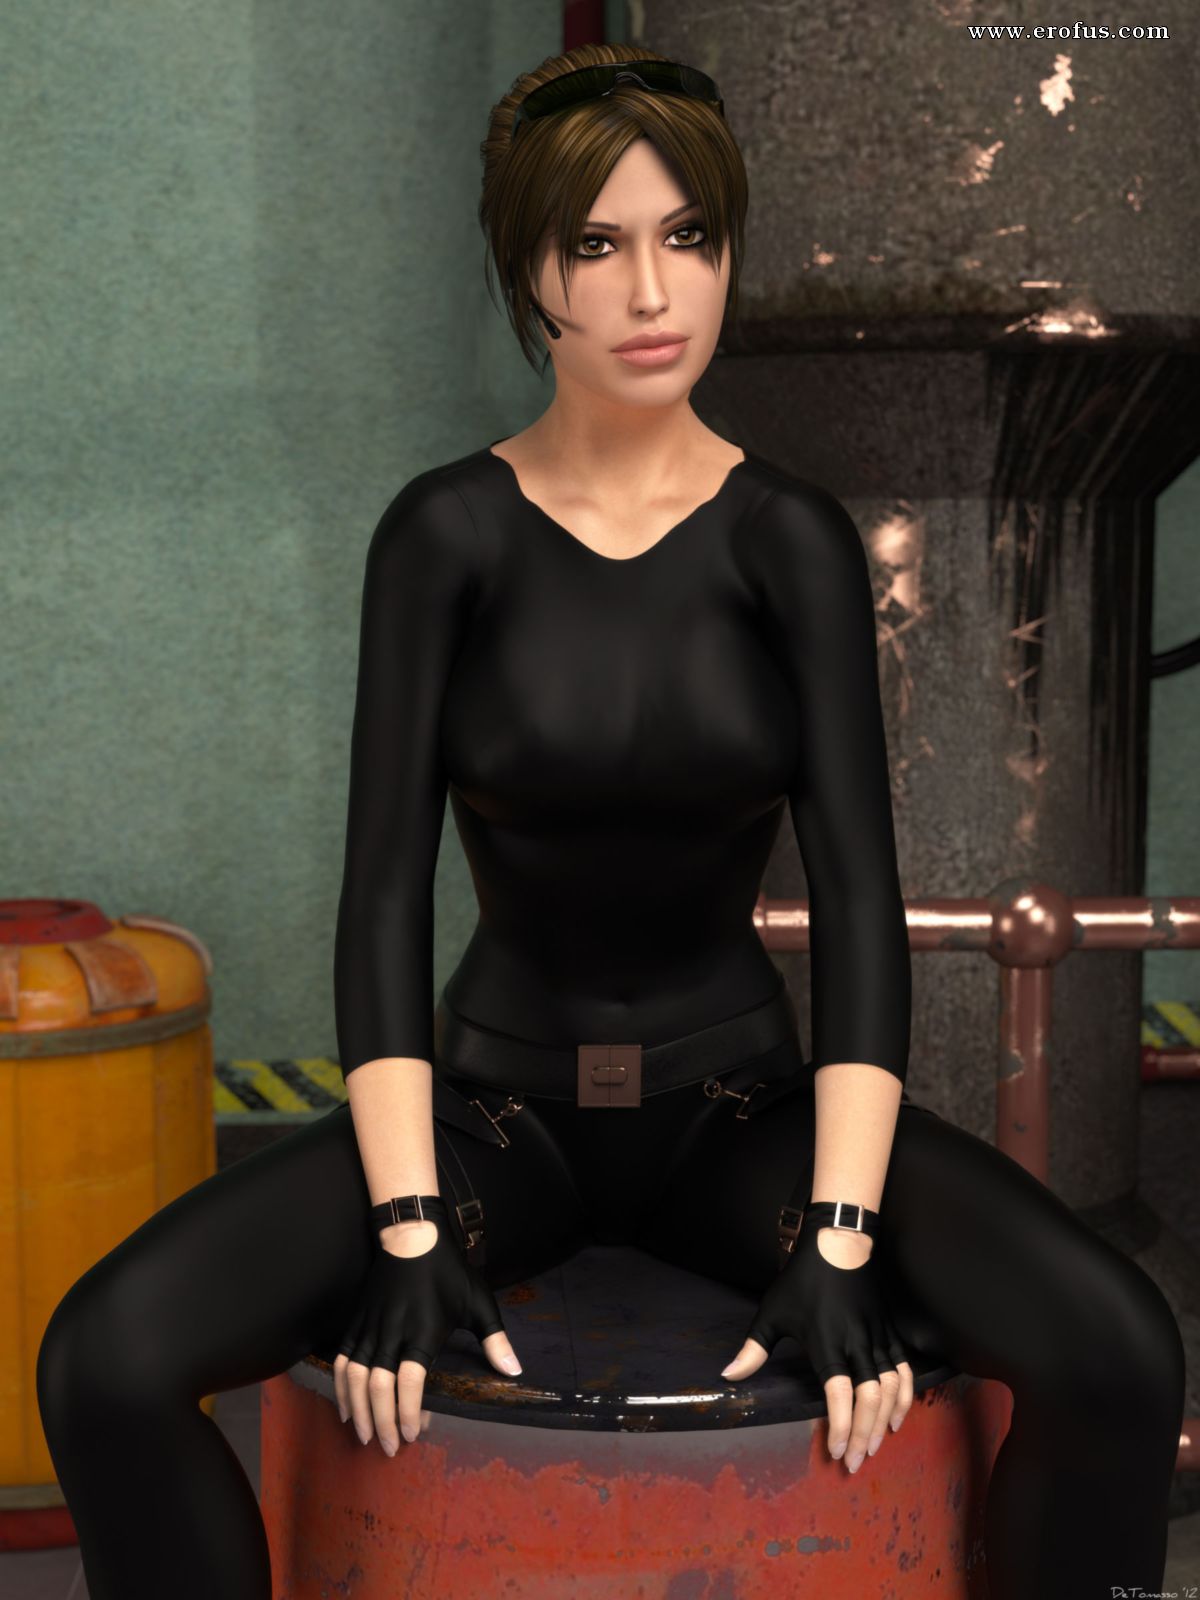 picture catsuit_2.jpg